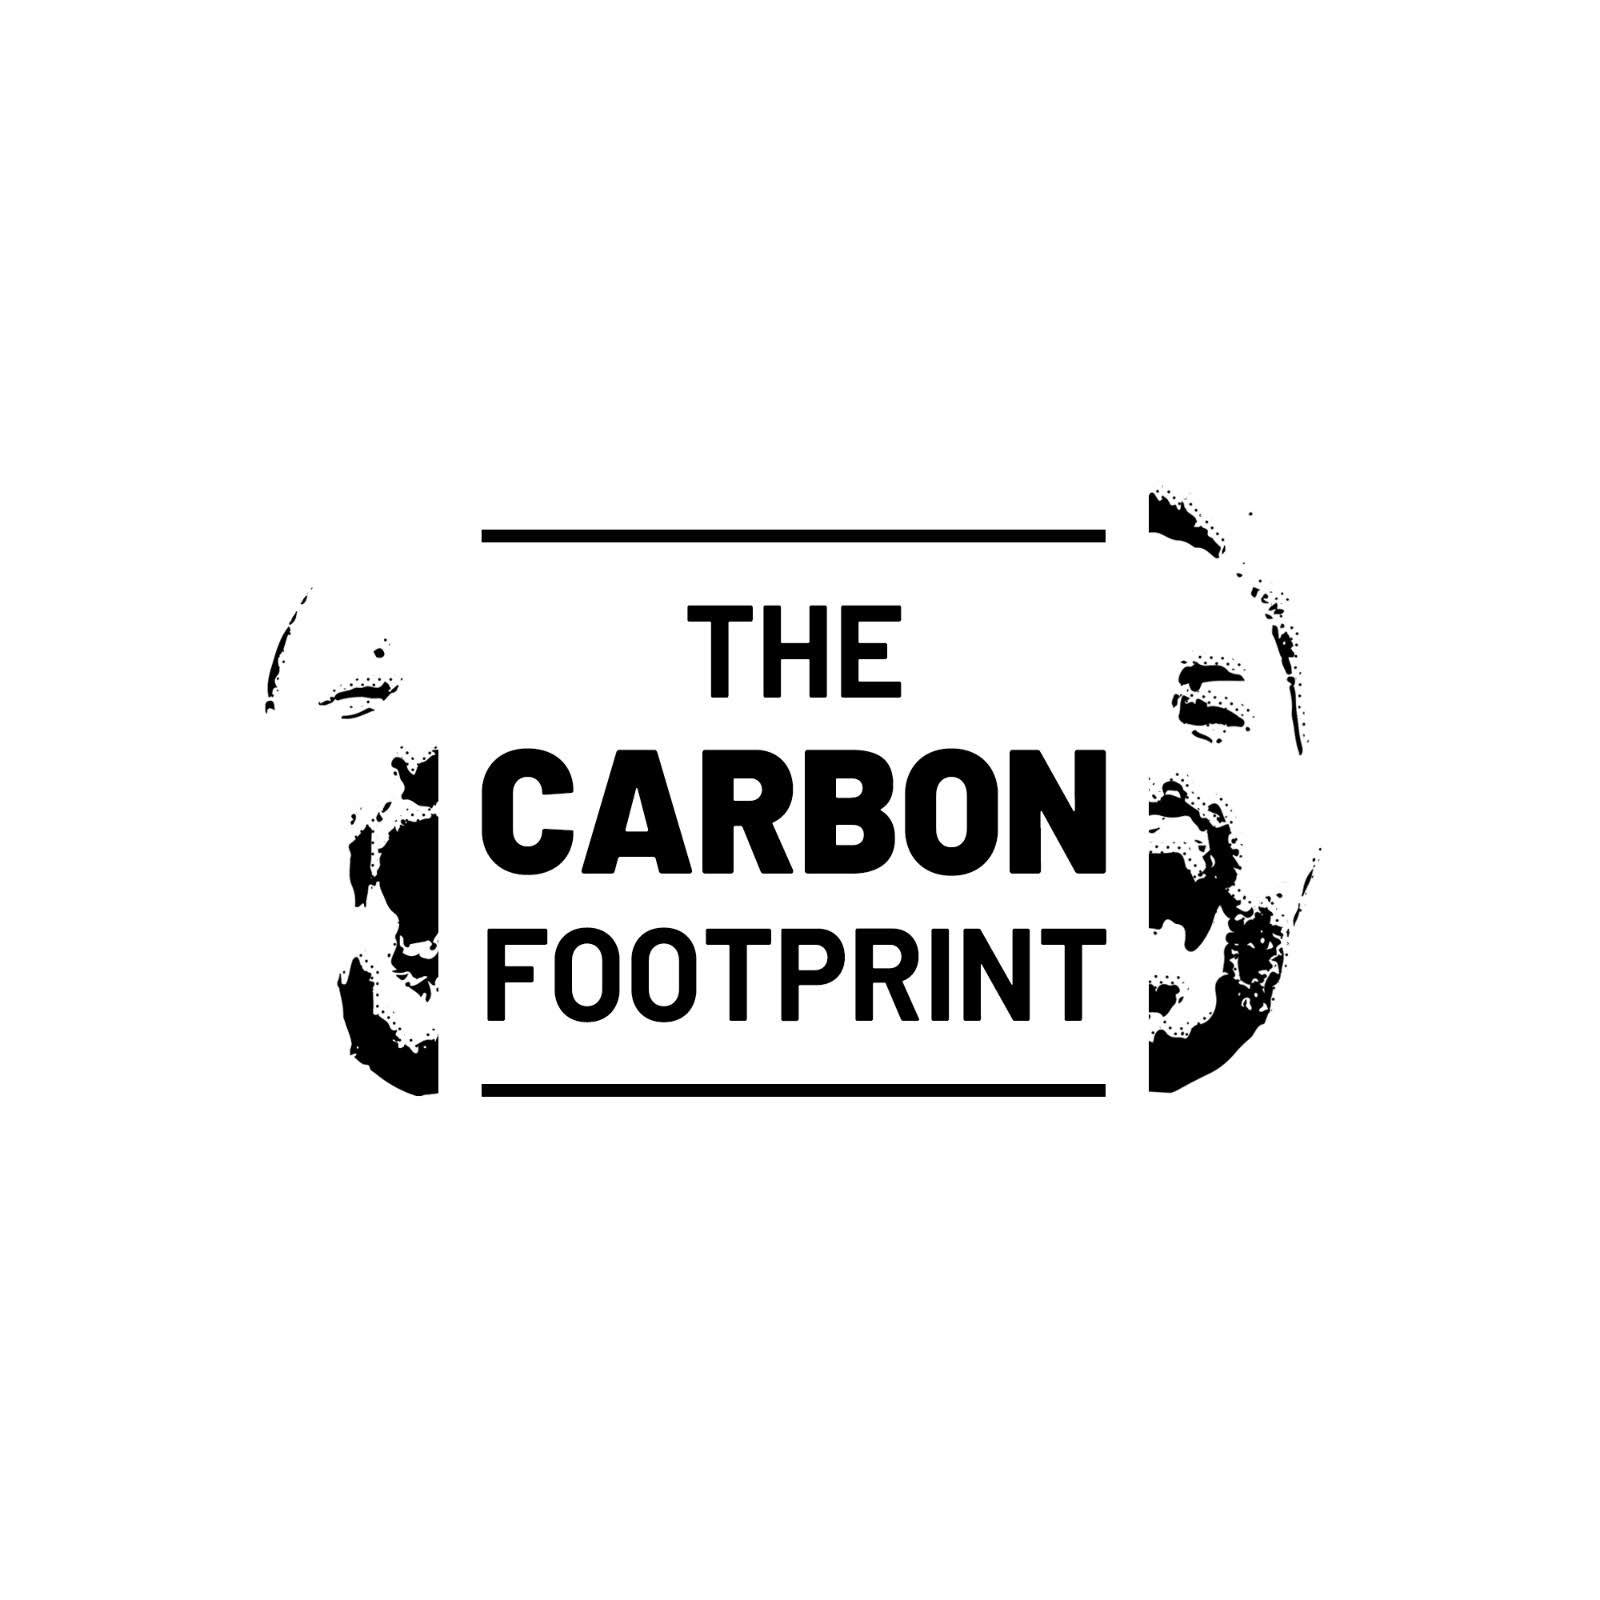 Artwork for The Carbon Footprint